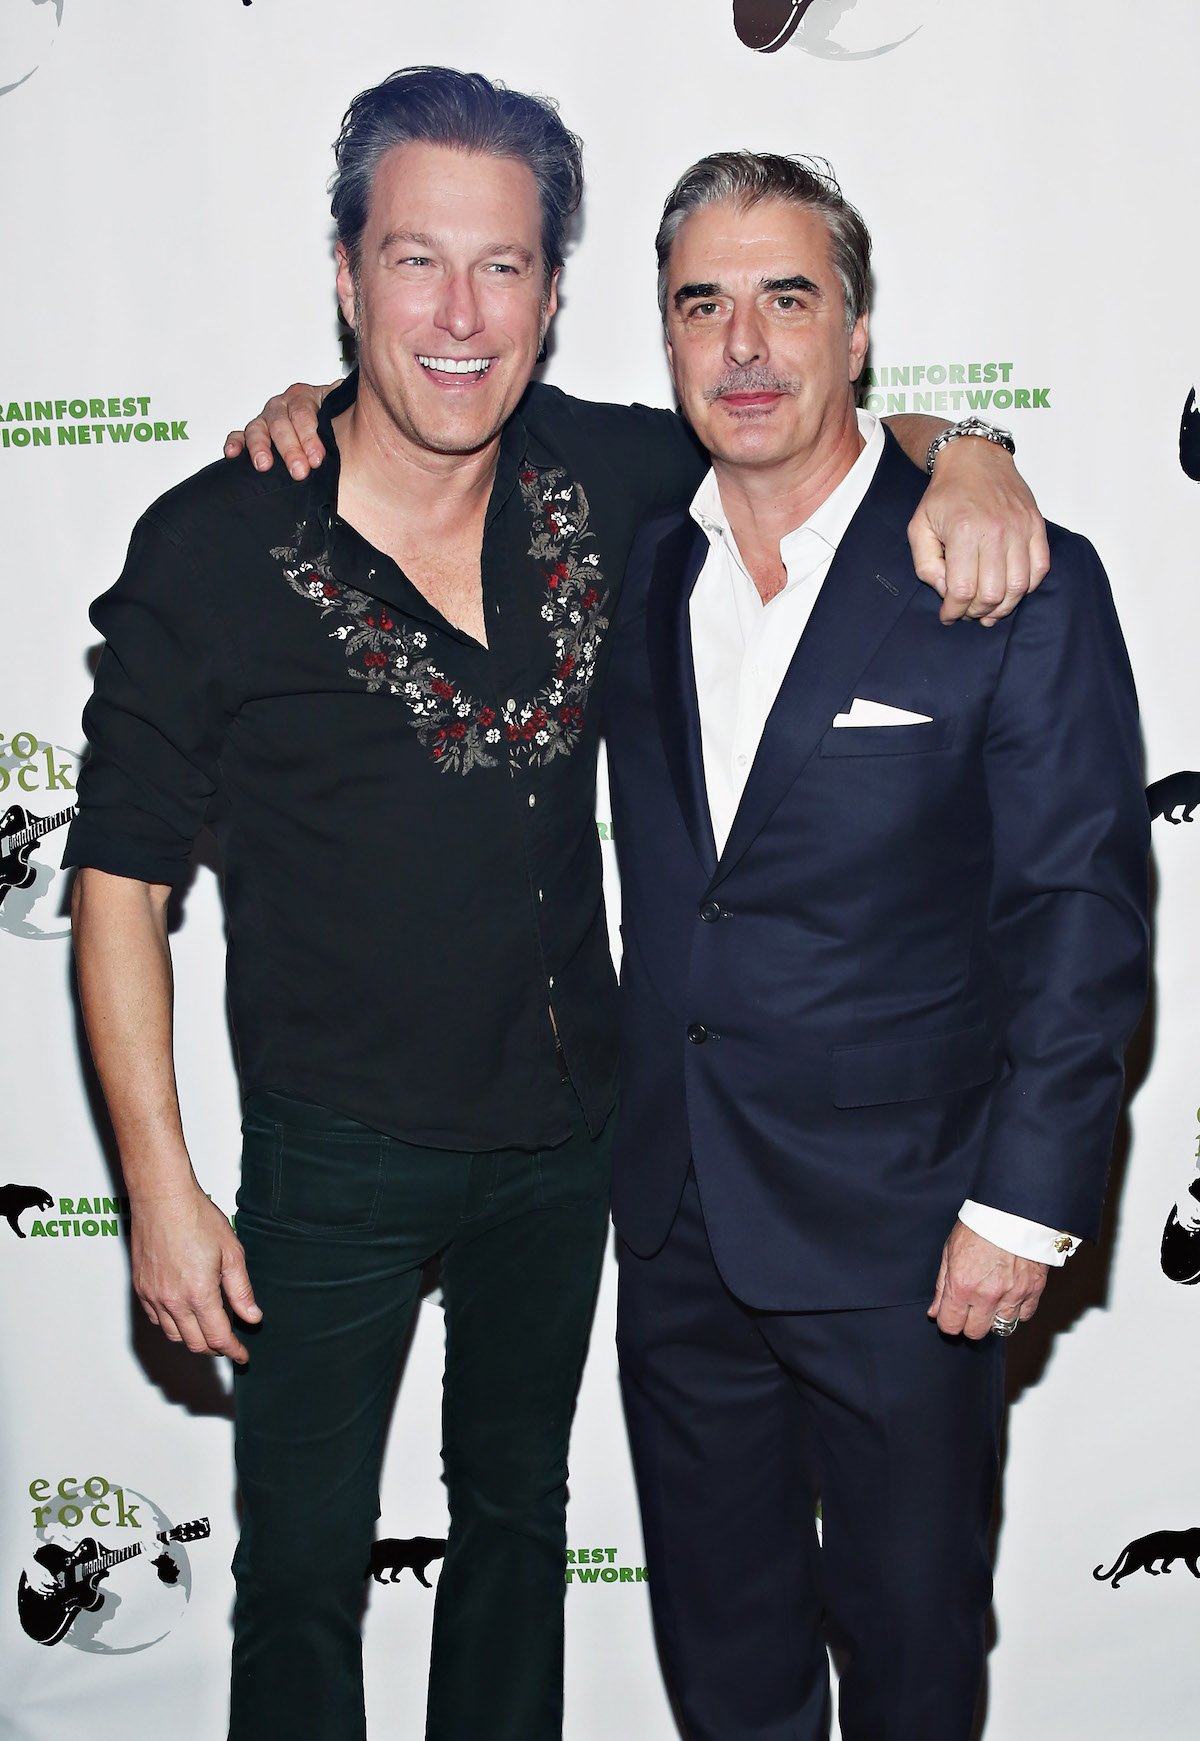 John Corbett and Chris Noth pose with their arms around each other at an event.